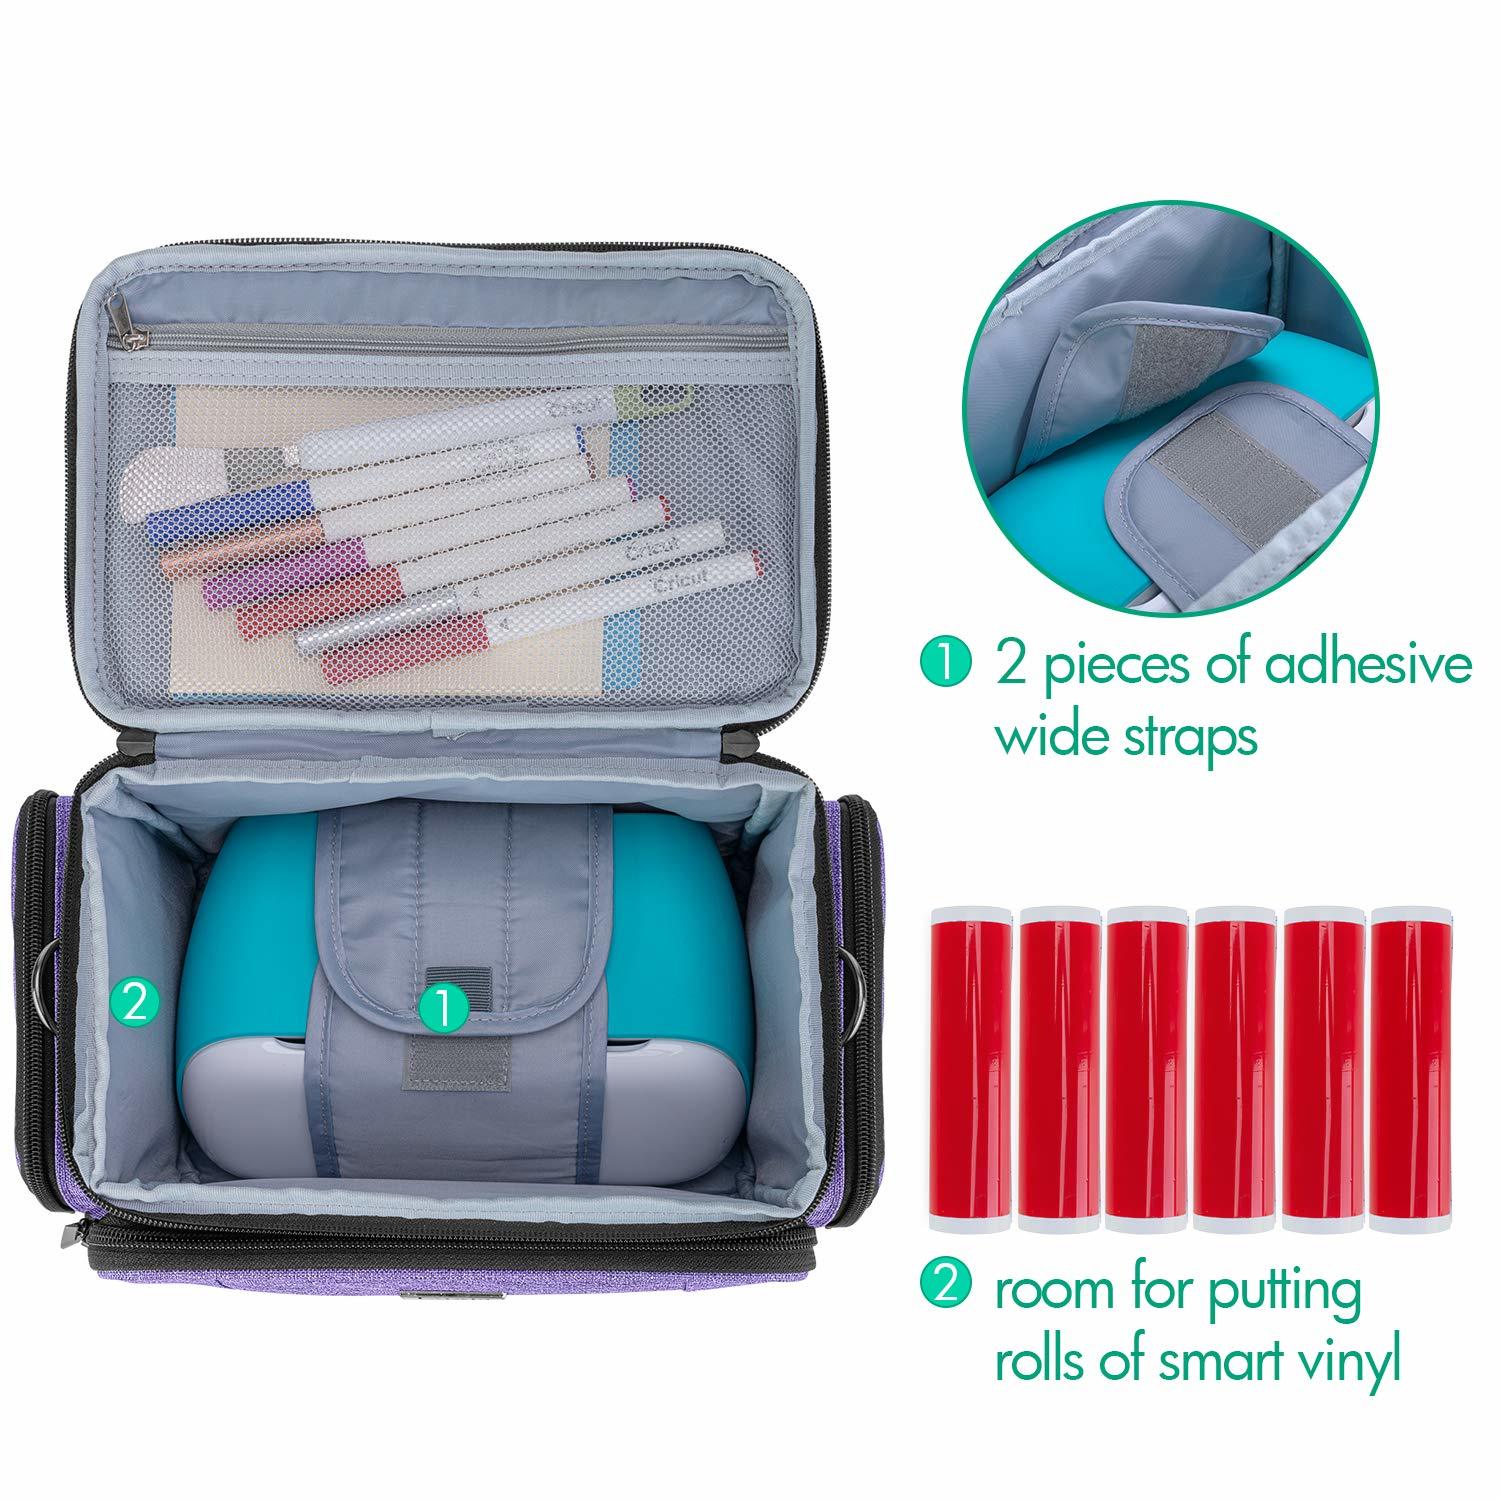 Carrying Bag Compatible With Cricut Joy, and 31 similar items